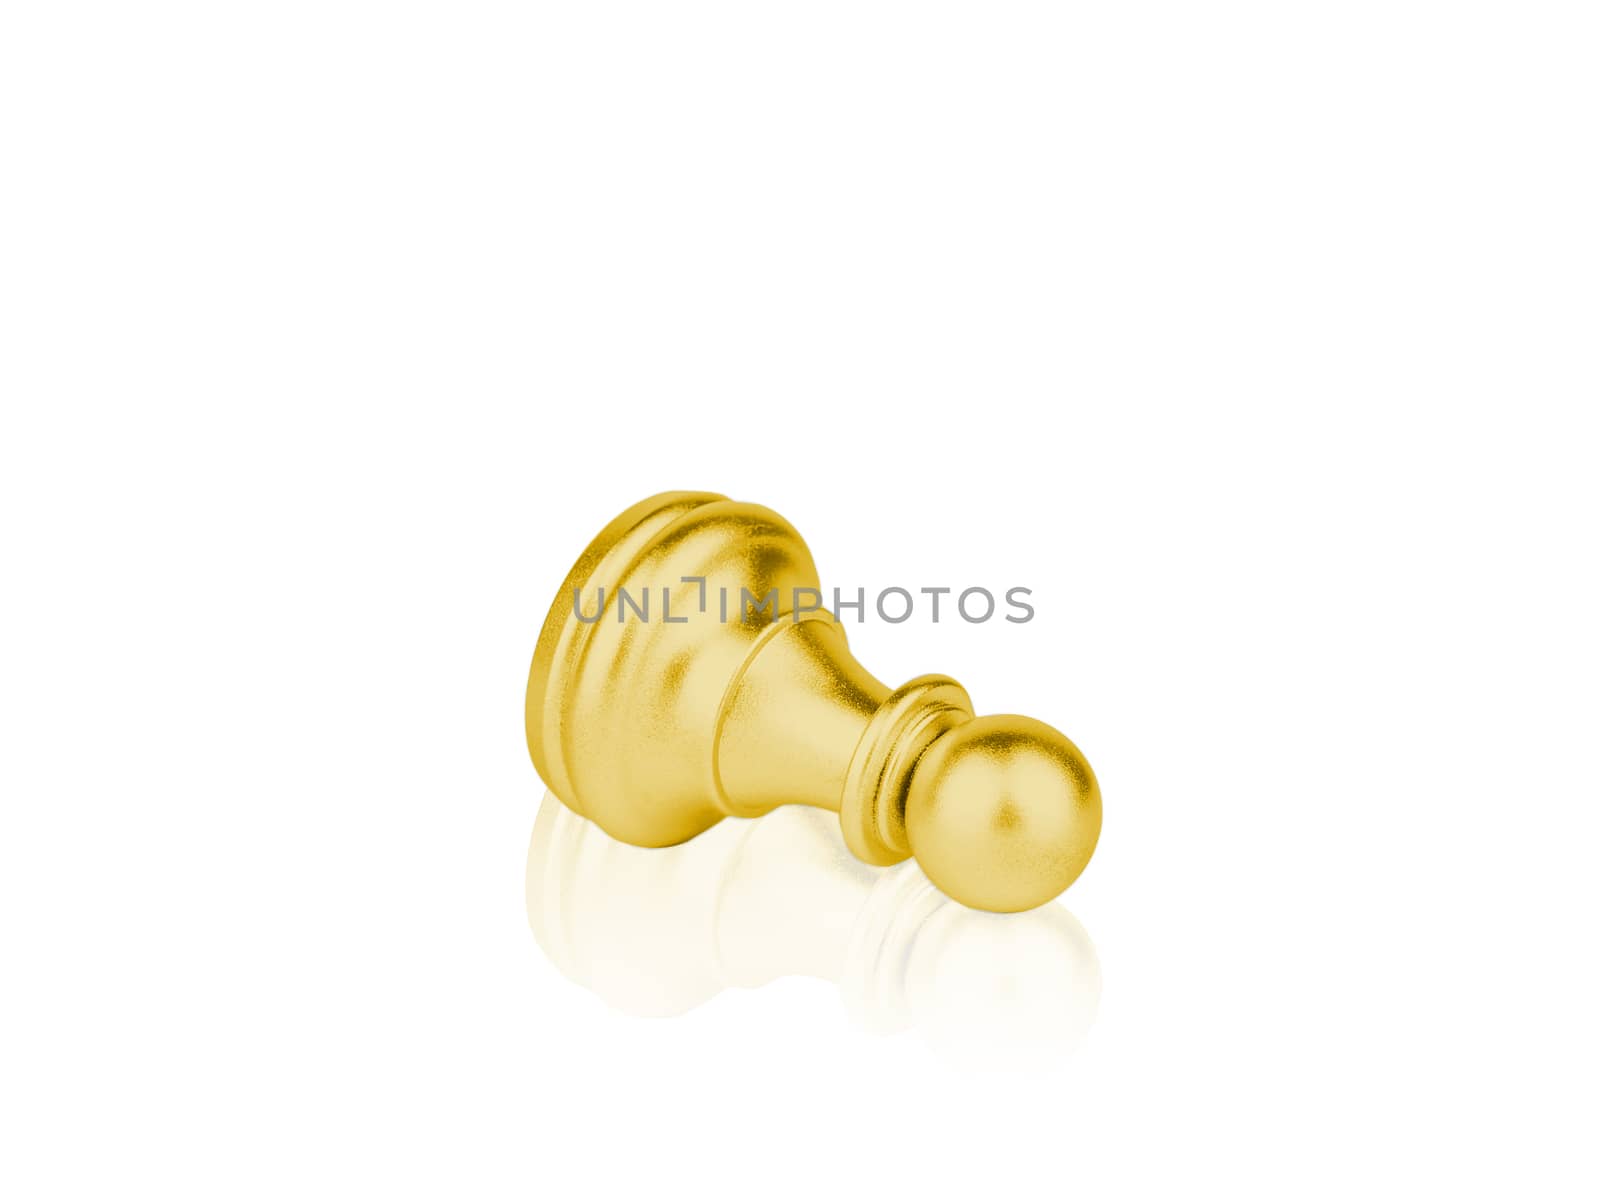 The gold Pawn Chess pieces battle falling isolated on white background with clipping path